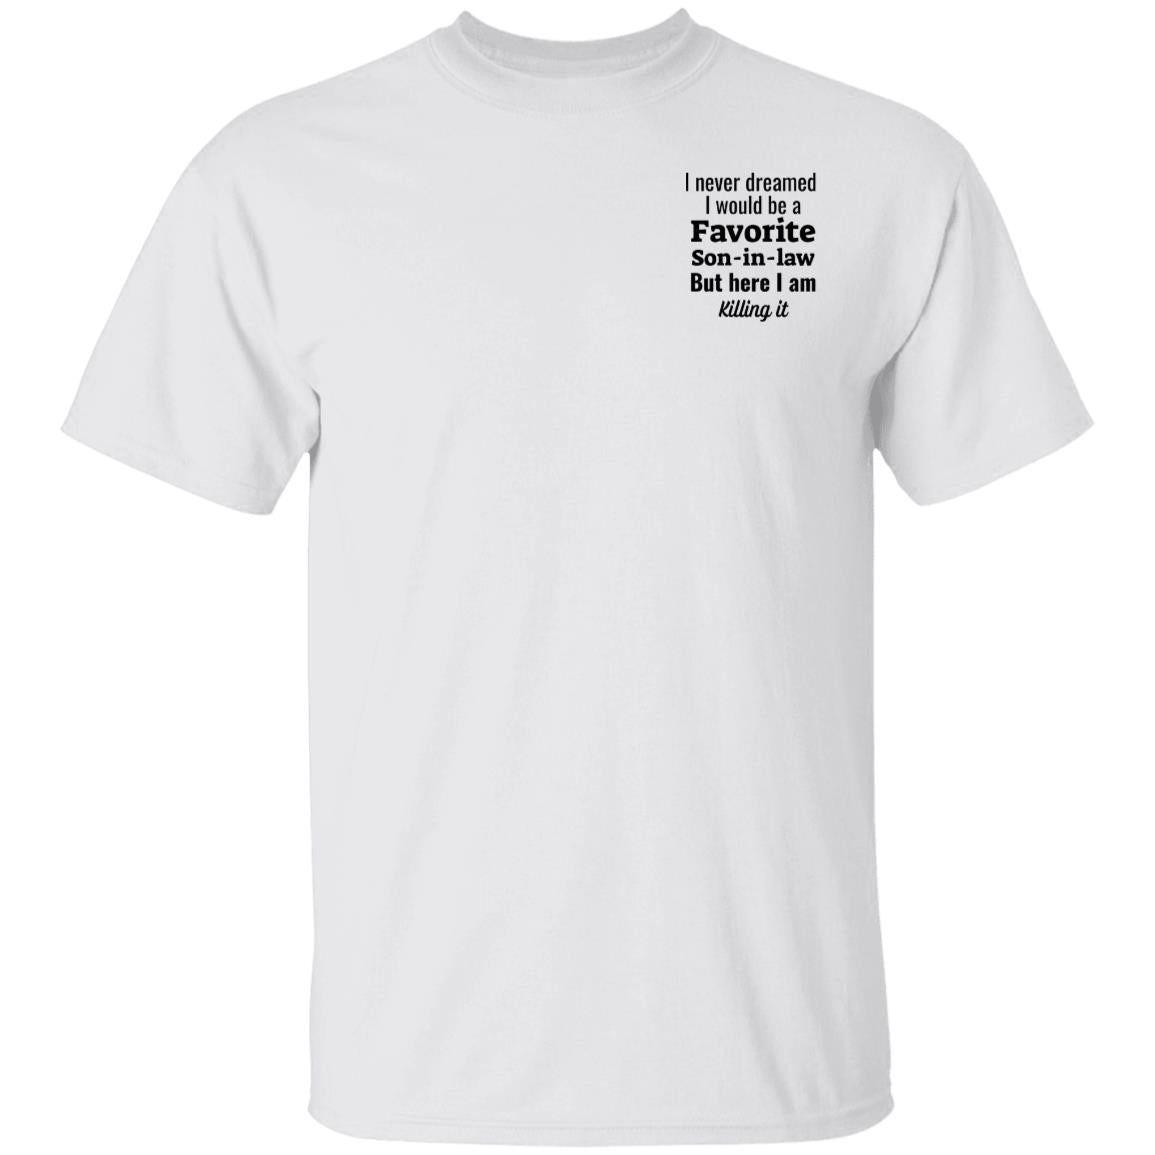 Get trendy with I never dreamed Favorite Son-in-Law left upper shoulder T-Shirt - T-Shirts available at Good Gift Company. Grab yours for $22.95 today!